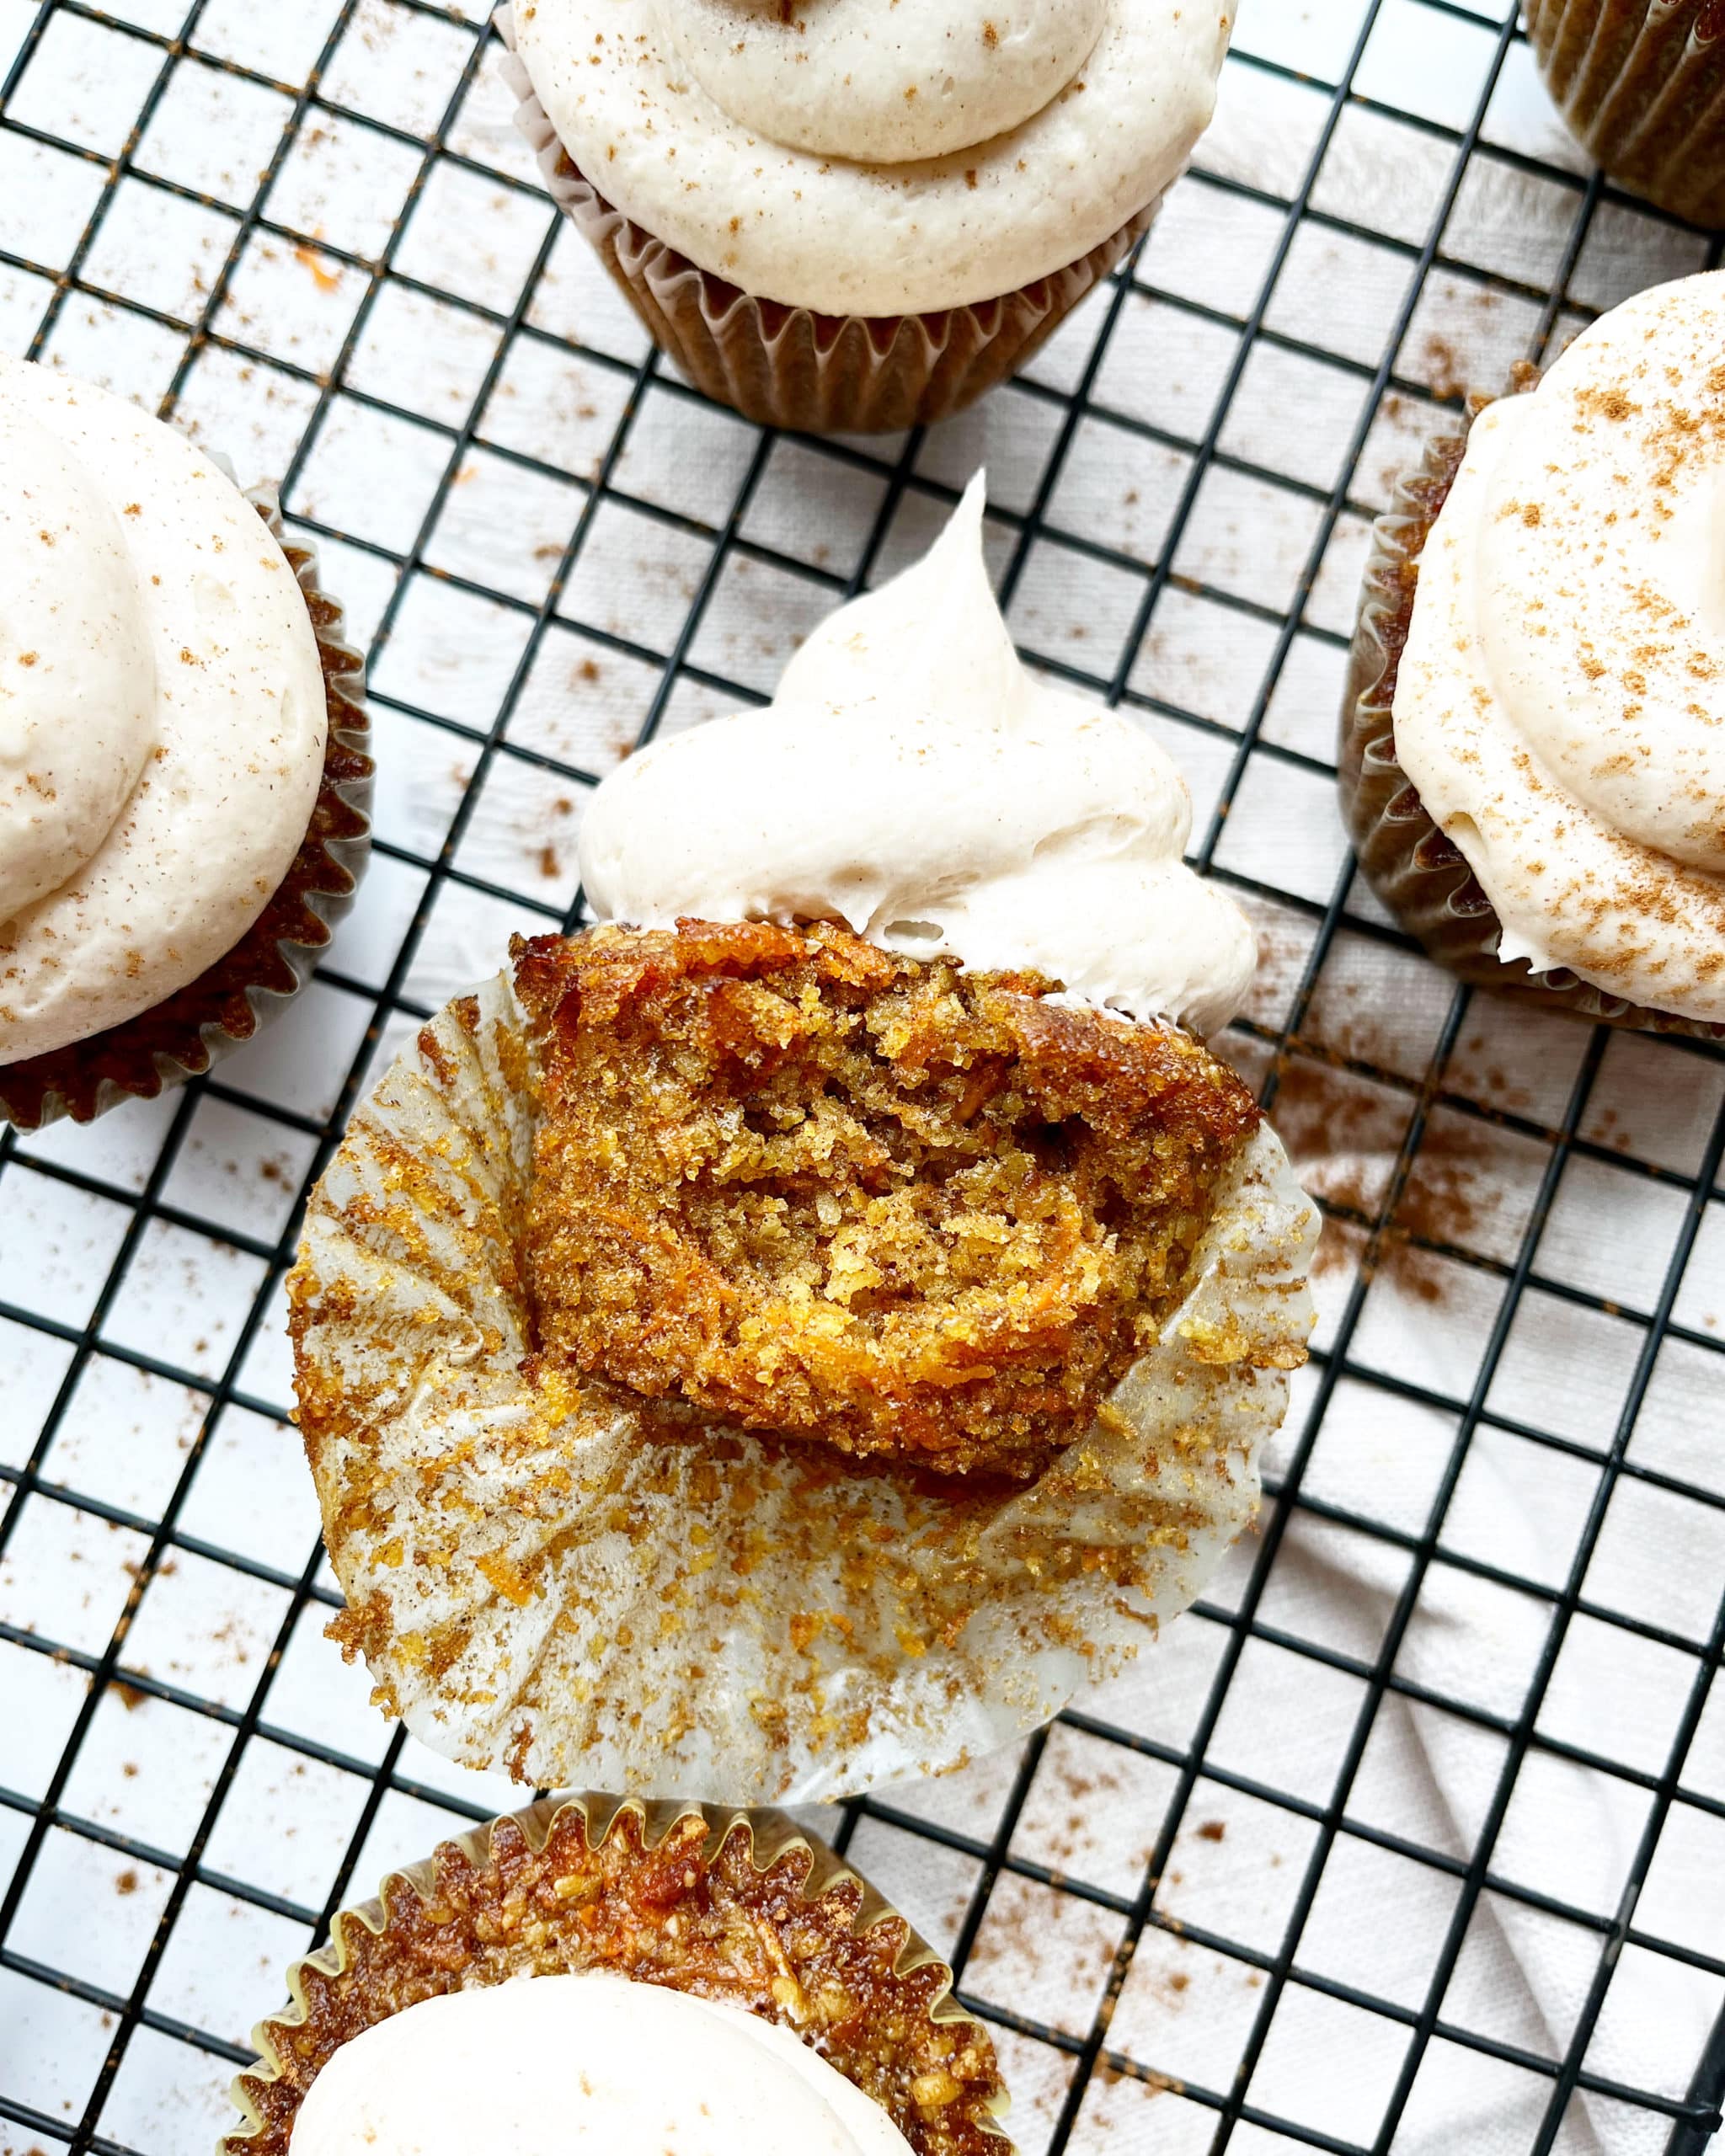 Gluten Free Carrot Cake Cupcakes with Cinnamon Frosting